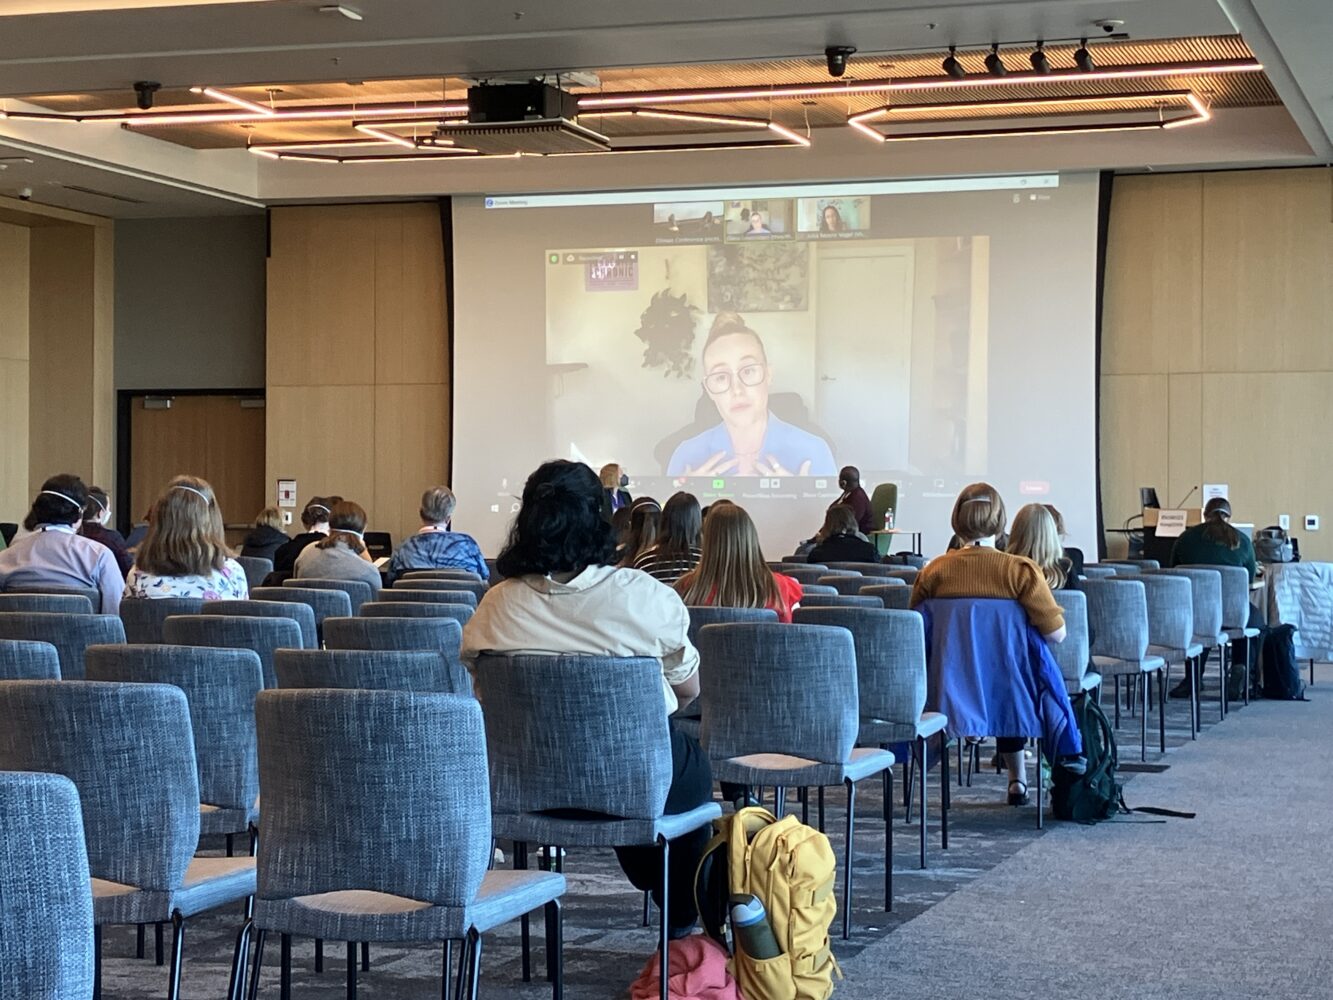 Conference attendees sit in chairs to watch a hybrid session on covering Long COVID. A panelist is on a video call on a projector screen at the front of the room.